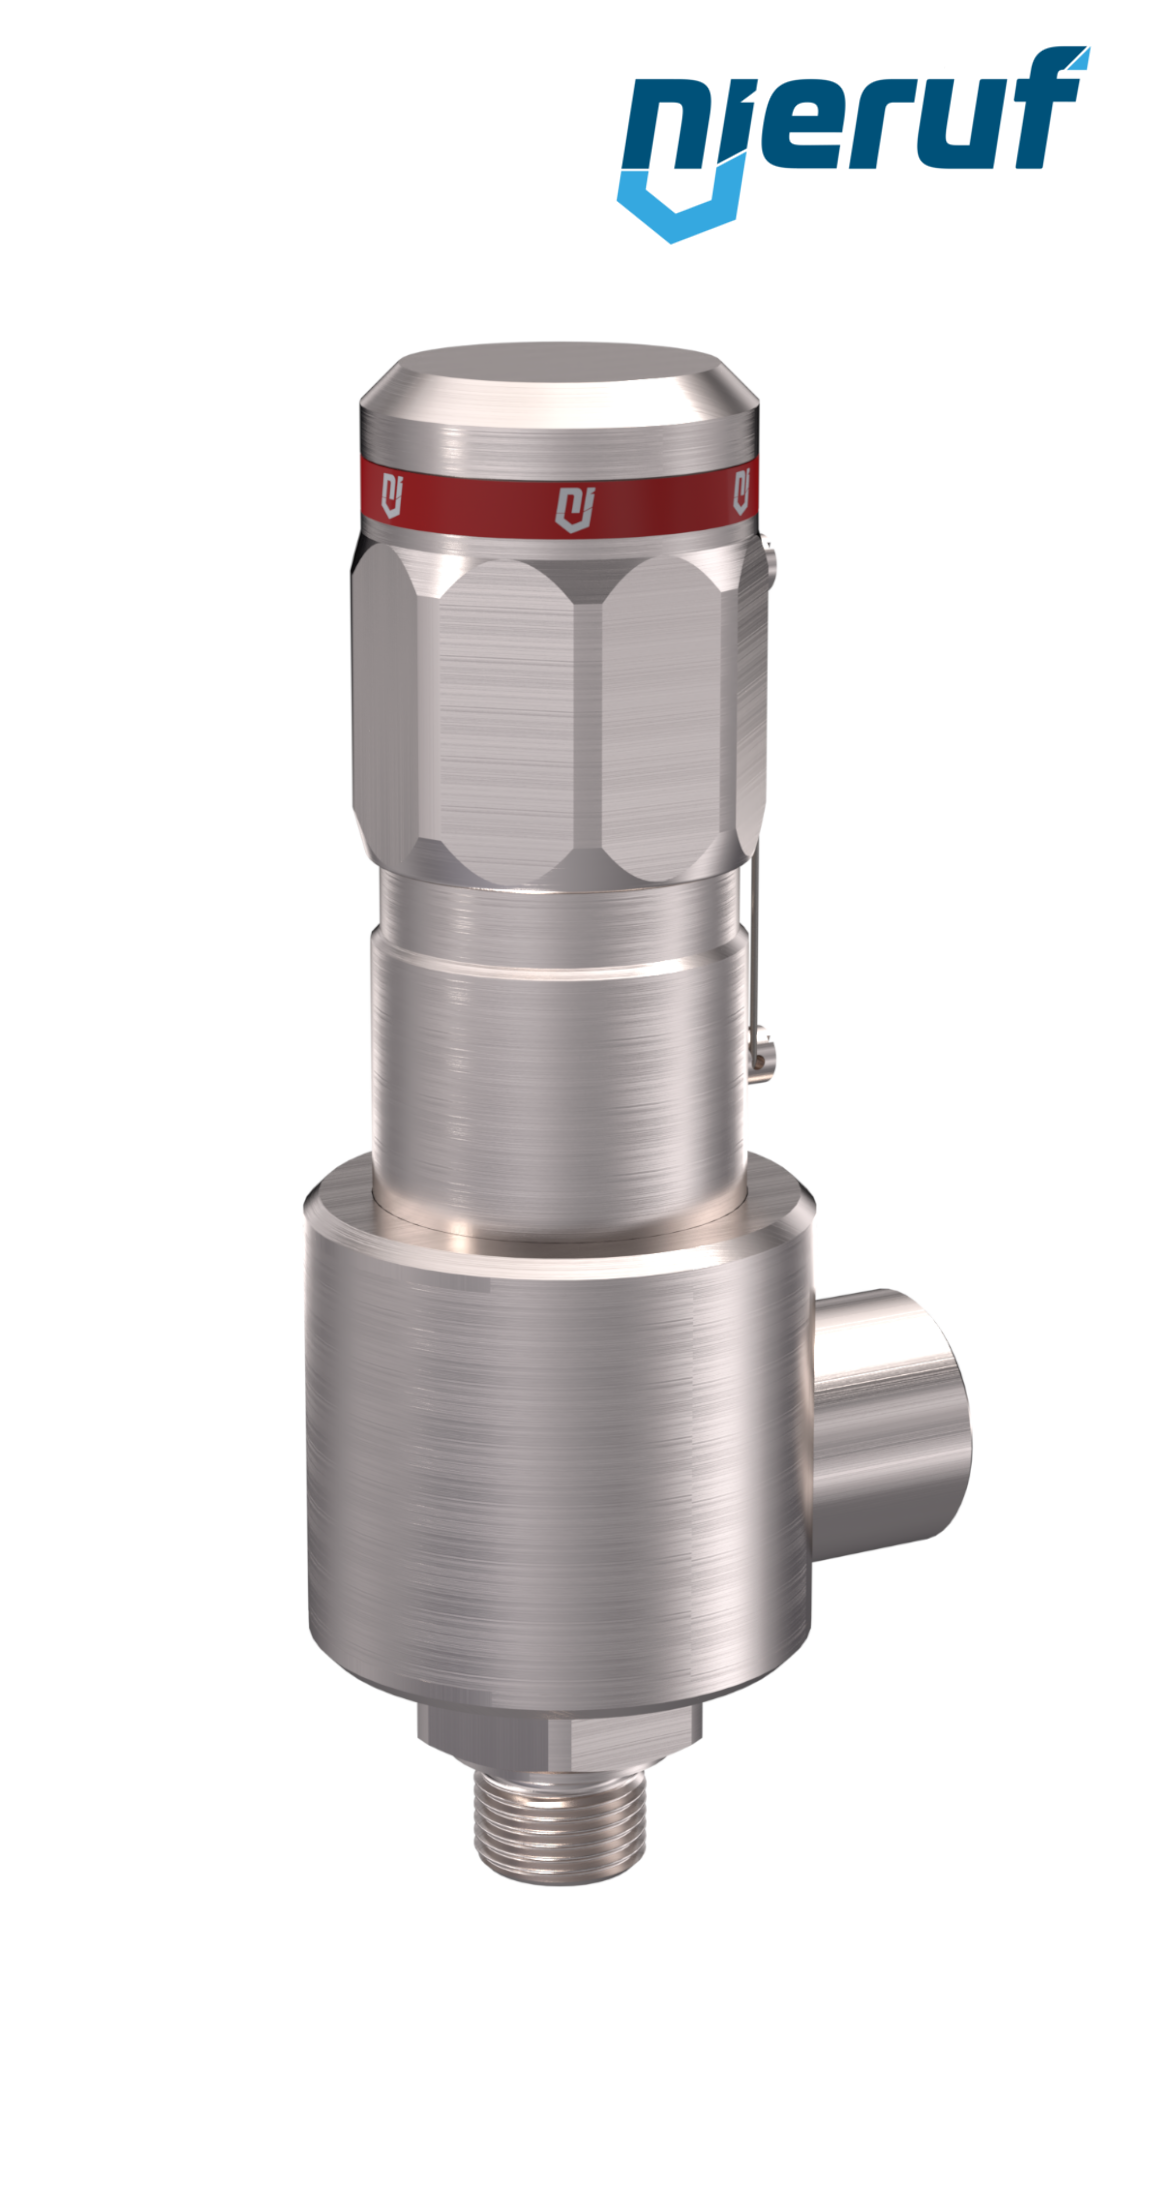 High-pressure safety valve 1/4" m x 1/2" fm SV15, stainless steel MD / PAI, without lifting device